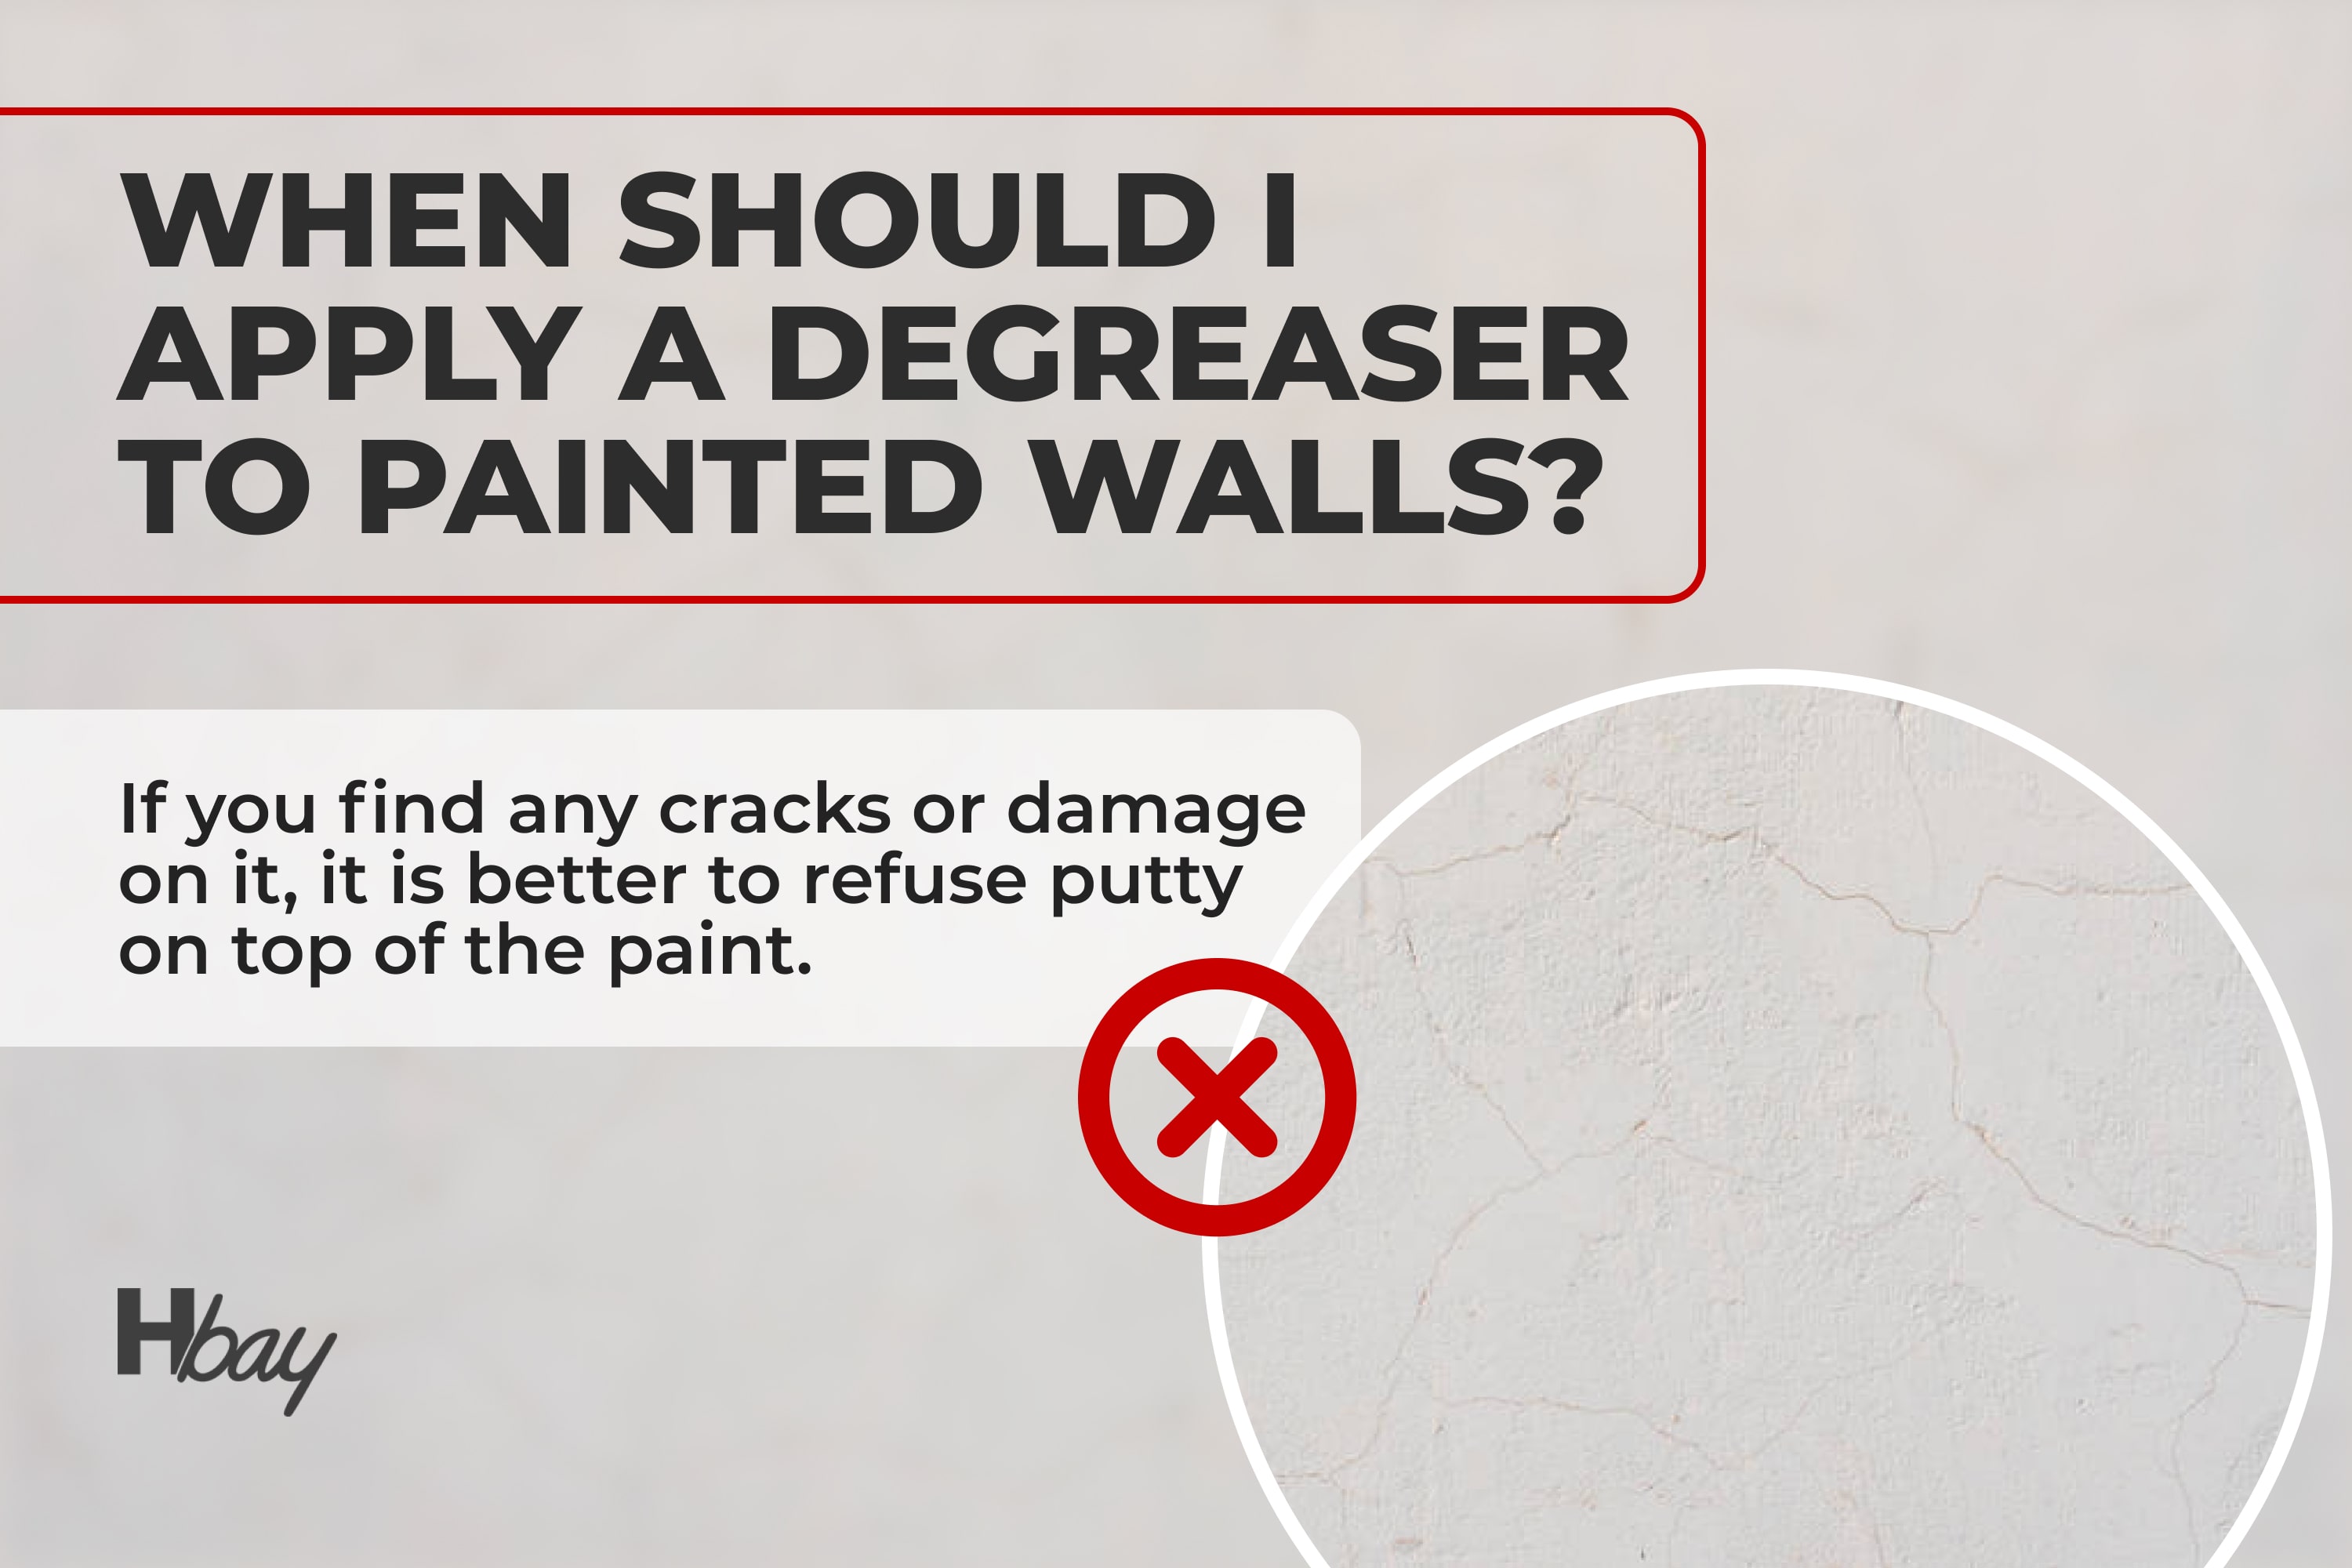 When should I apply a degreaser to painted walls